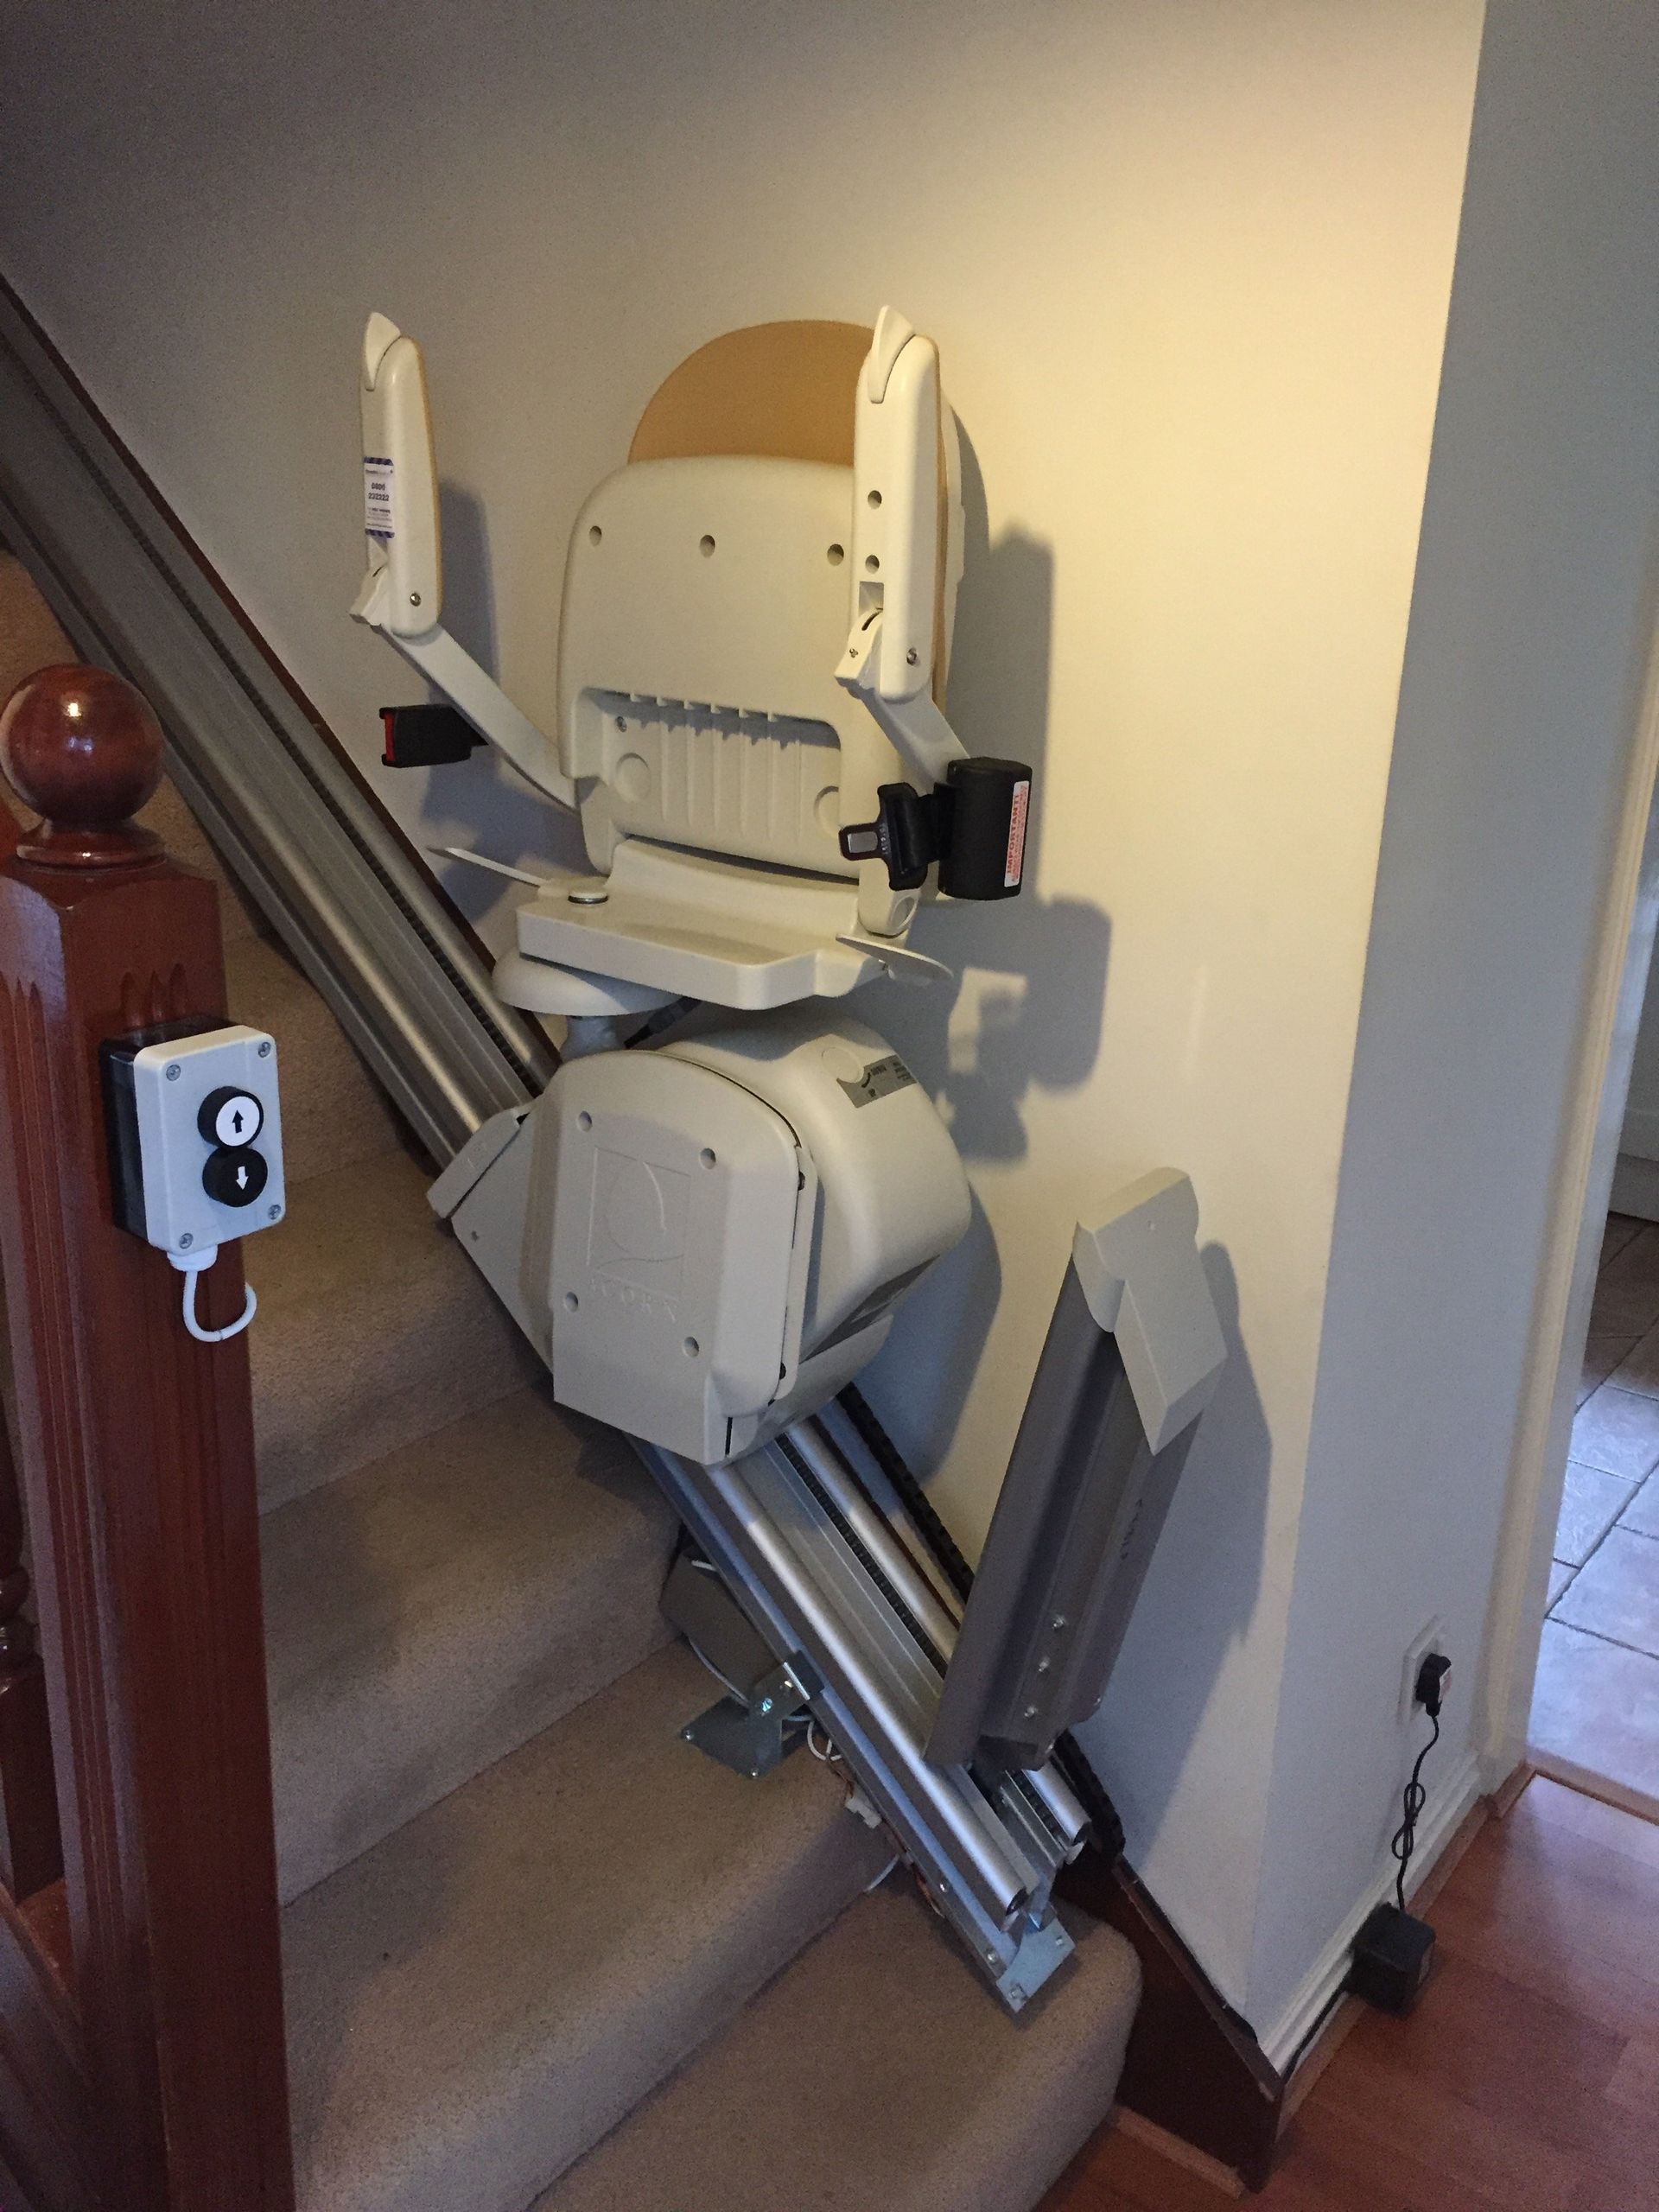 Is it worth trying to fit a used stairlift yourself or should it be left to the professionals?